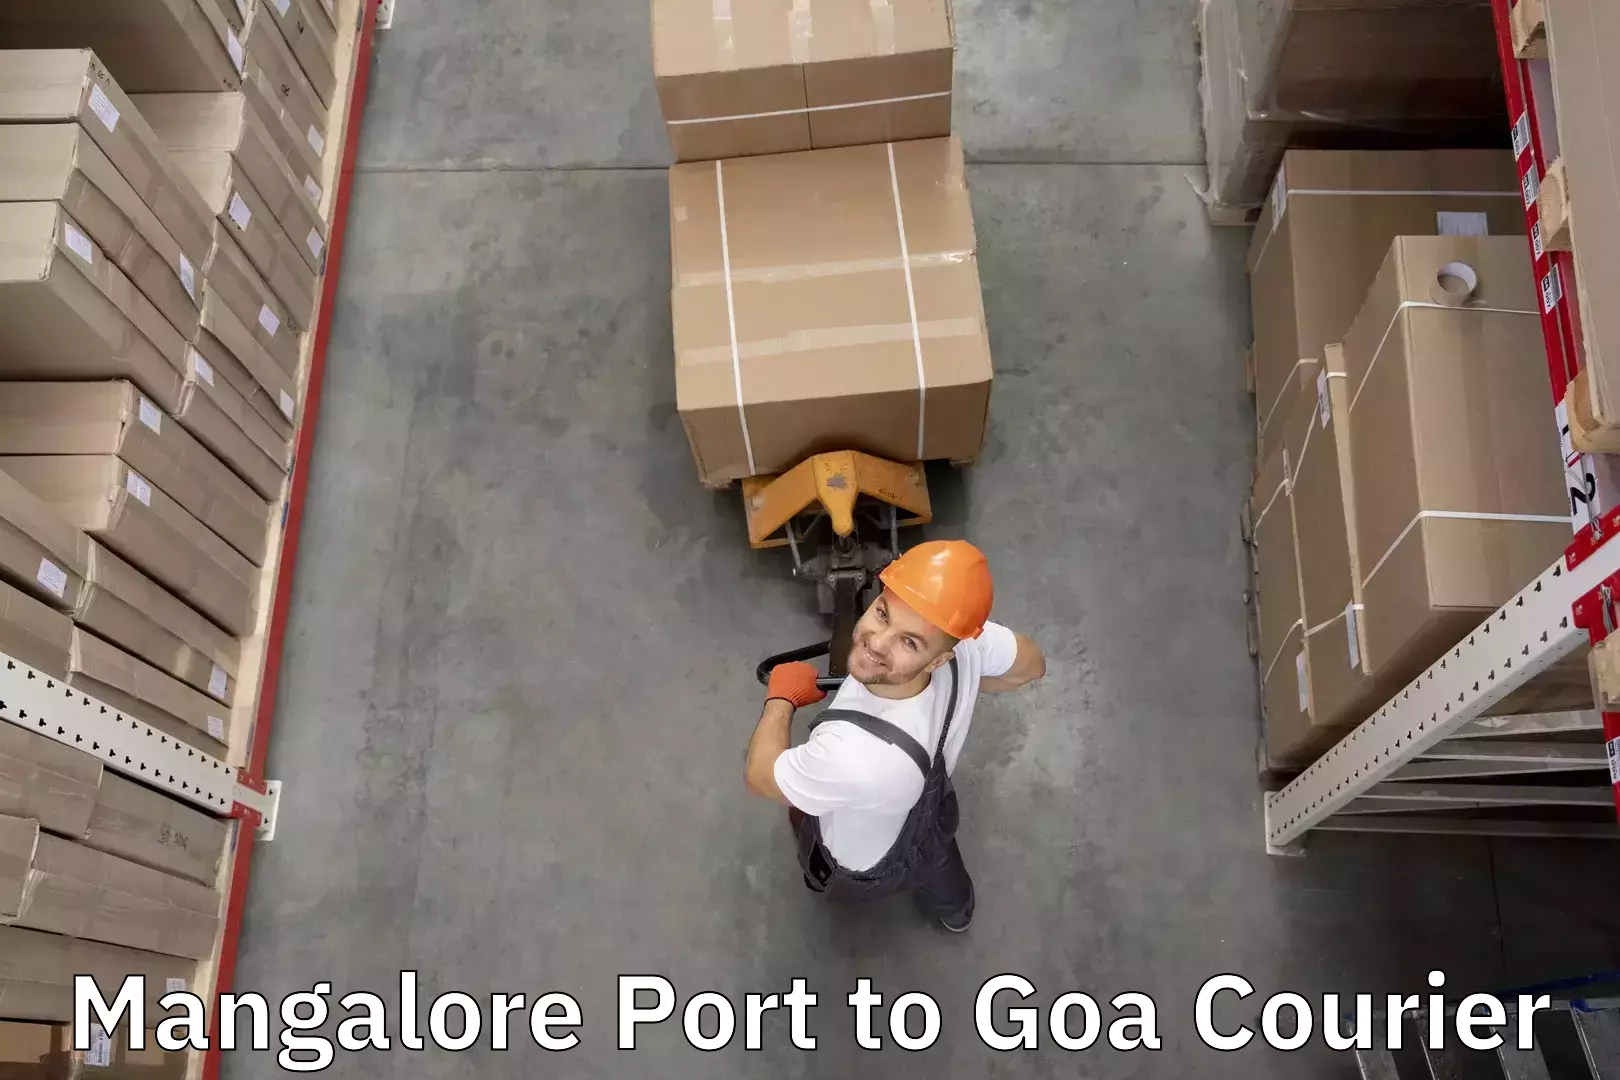 Luggage delivery network Mangalore Port to Panjim